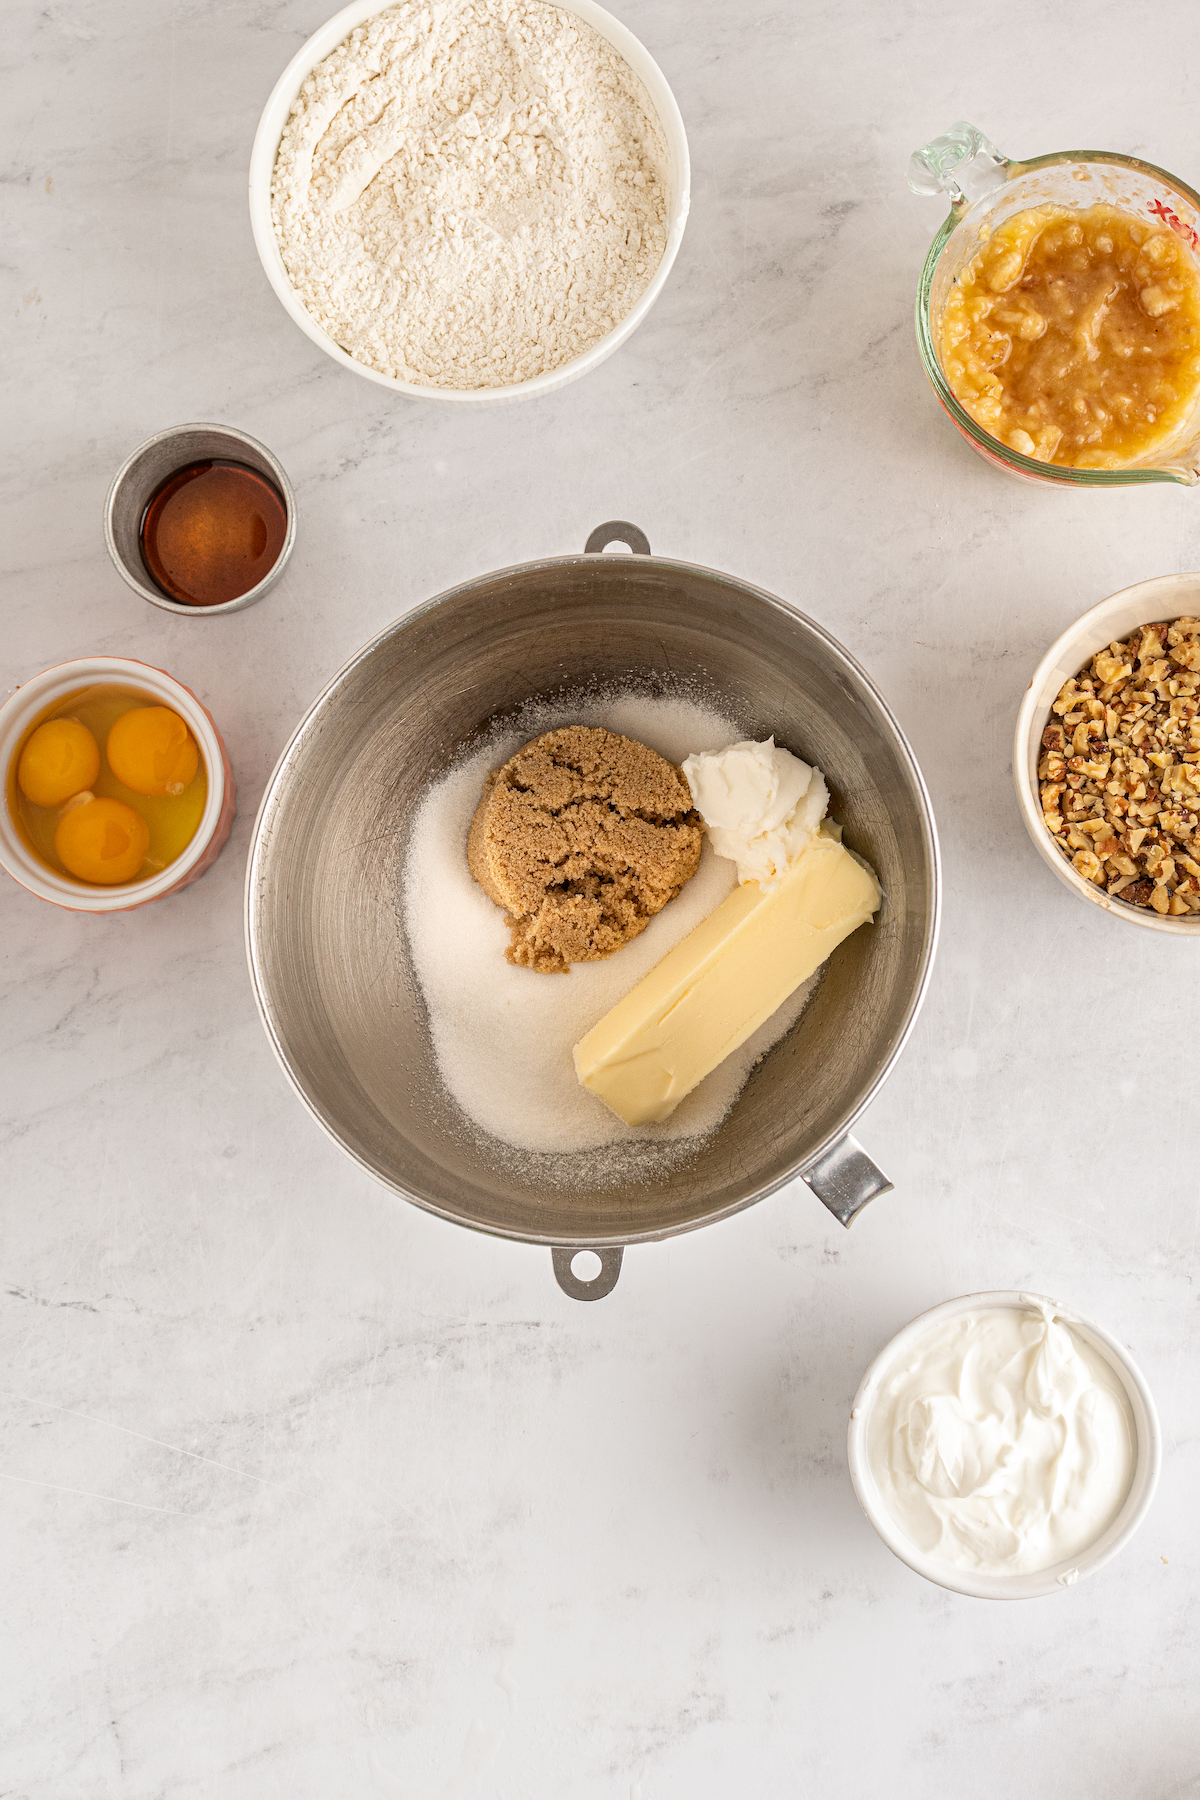 Butter, shortening, white sugar, and brown sugar in a mixing bowl.